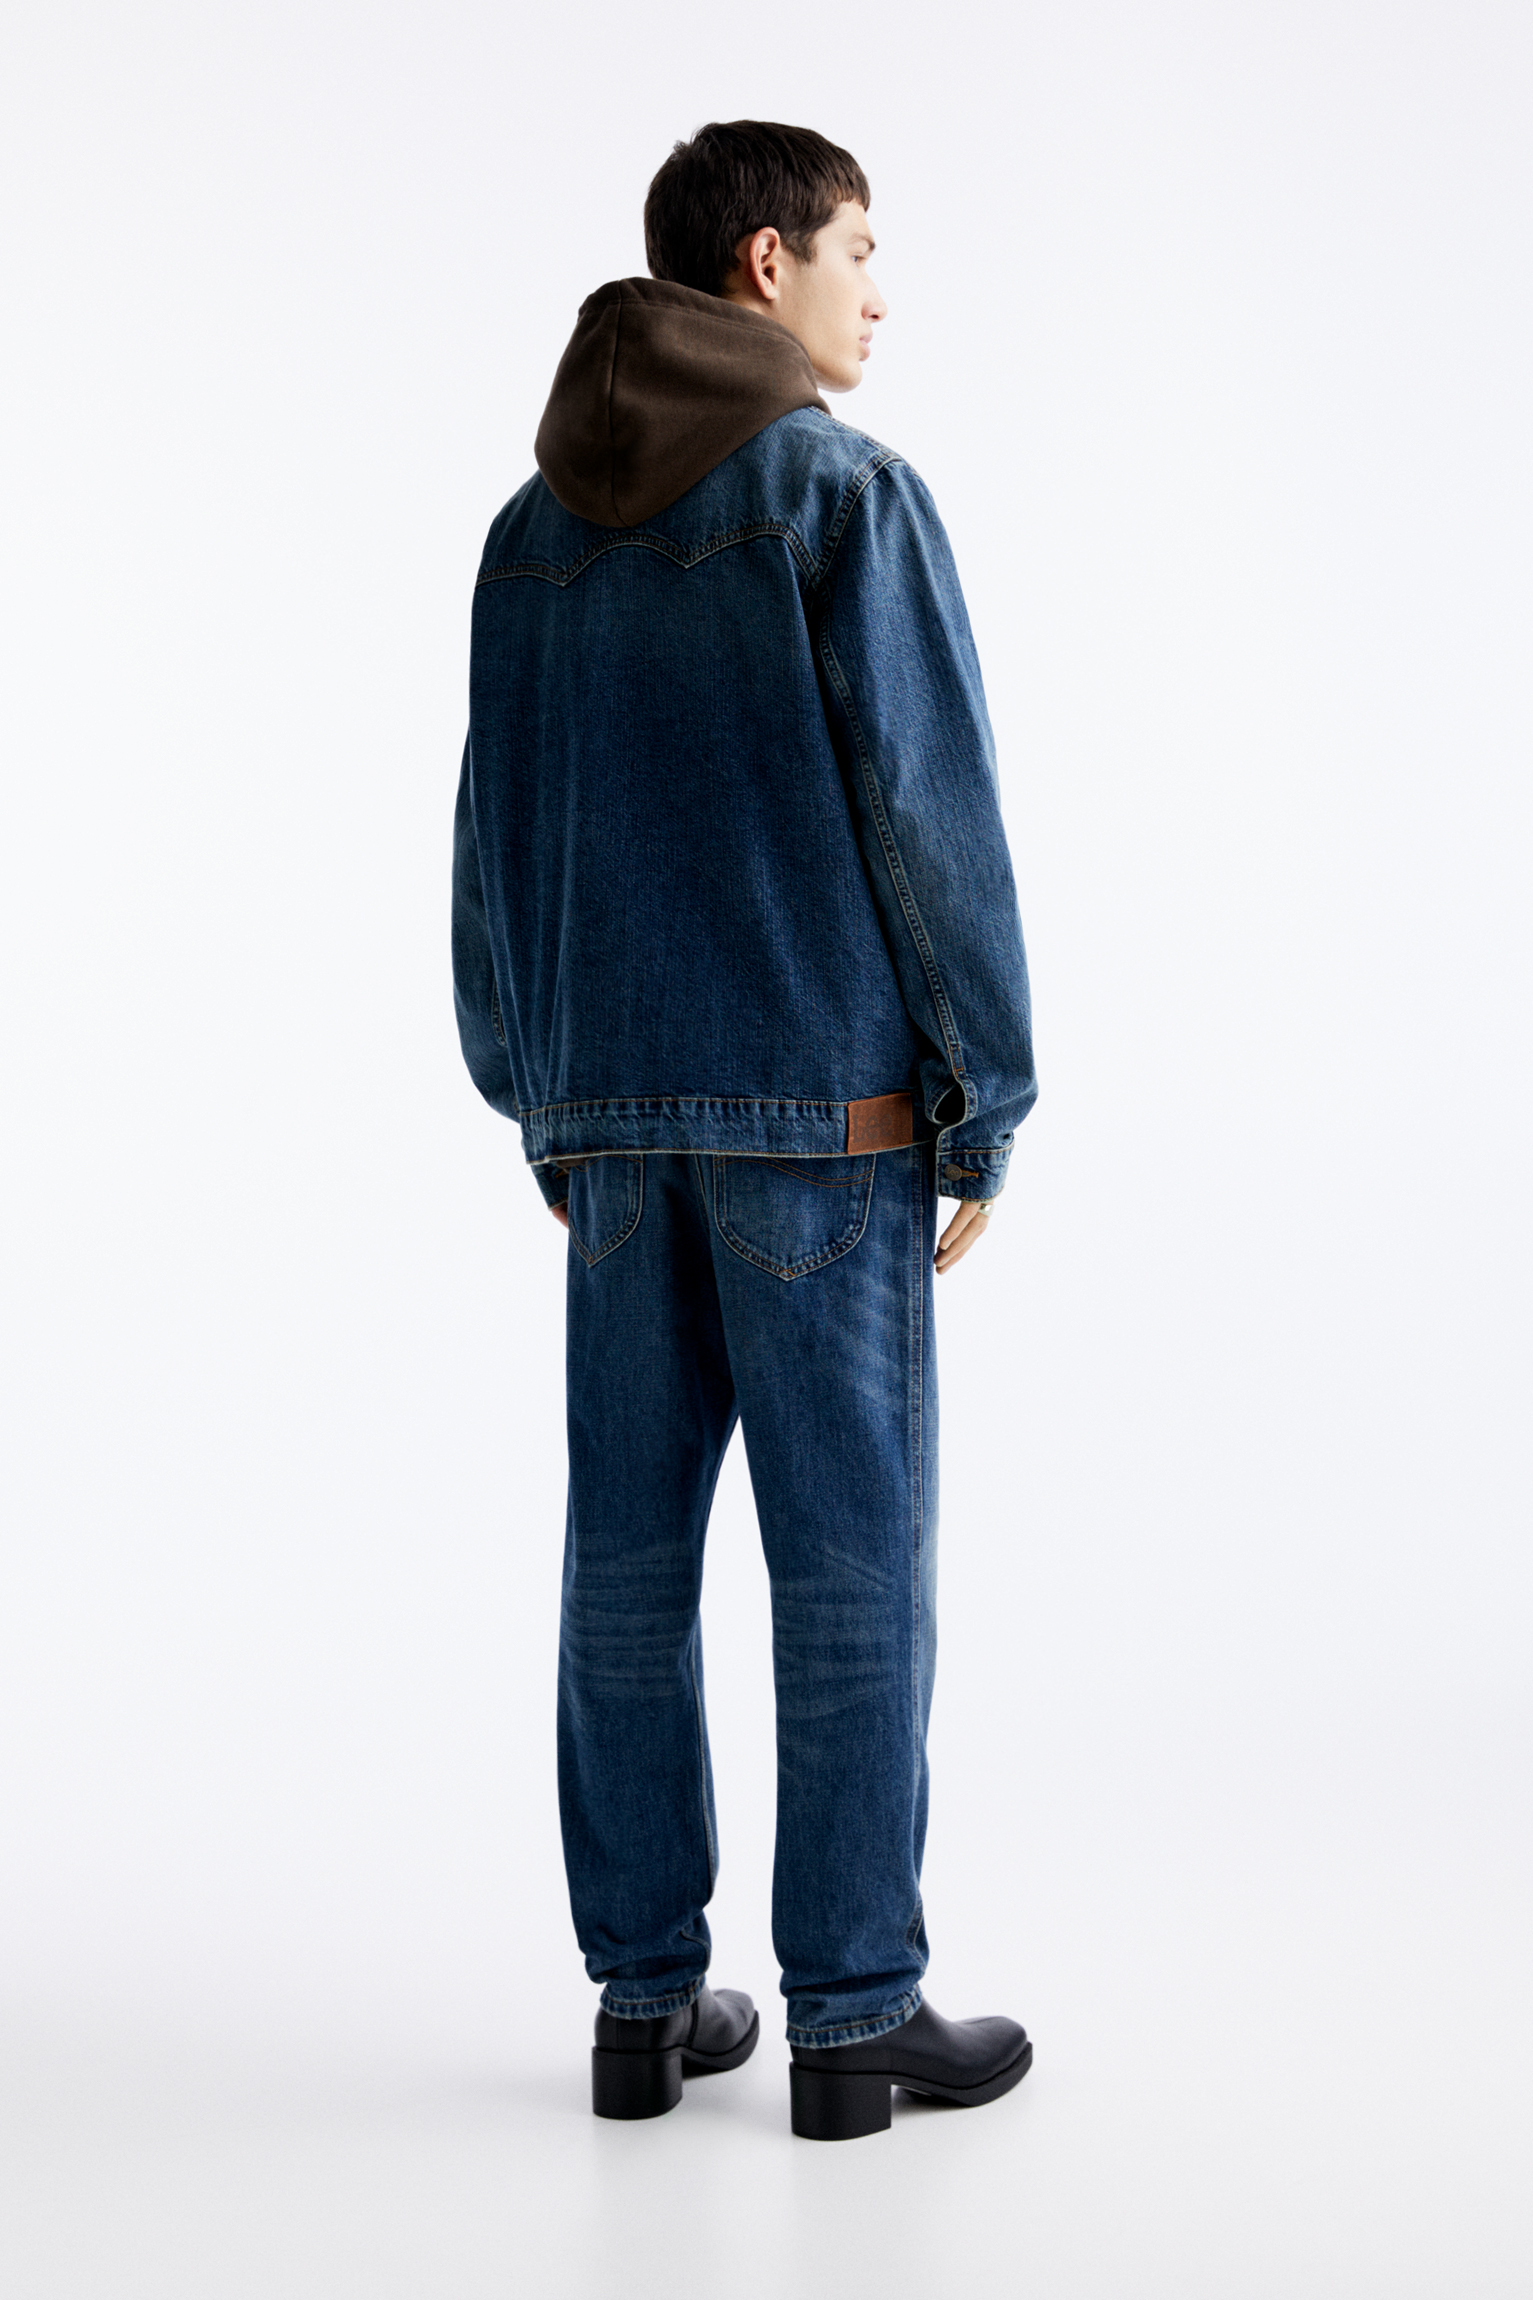 Urban Renewal Vintage Levi's, Lee & Wrangler Denim Jacket | Urban  Outfitters Hong Kong - Clothing, Music, Home & Accessories